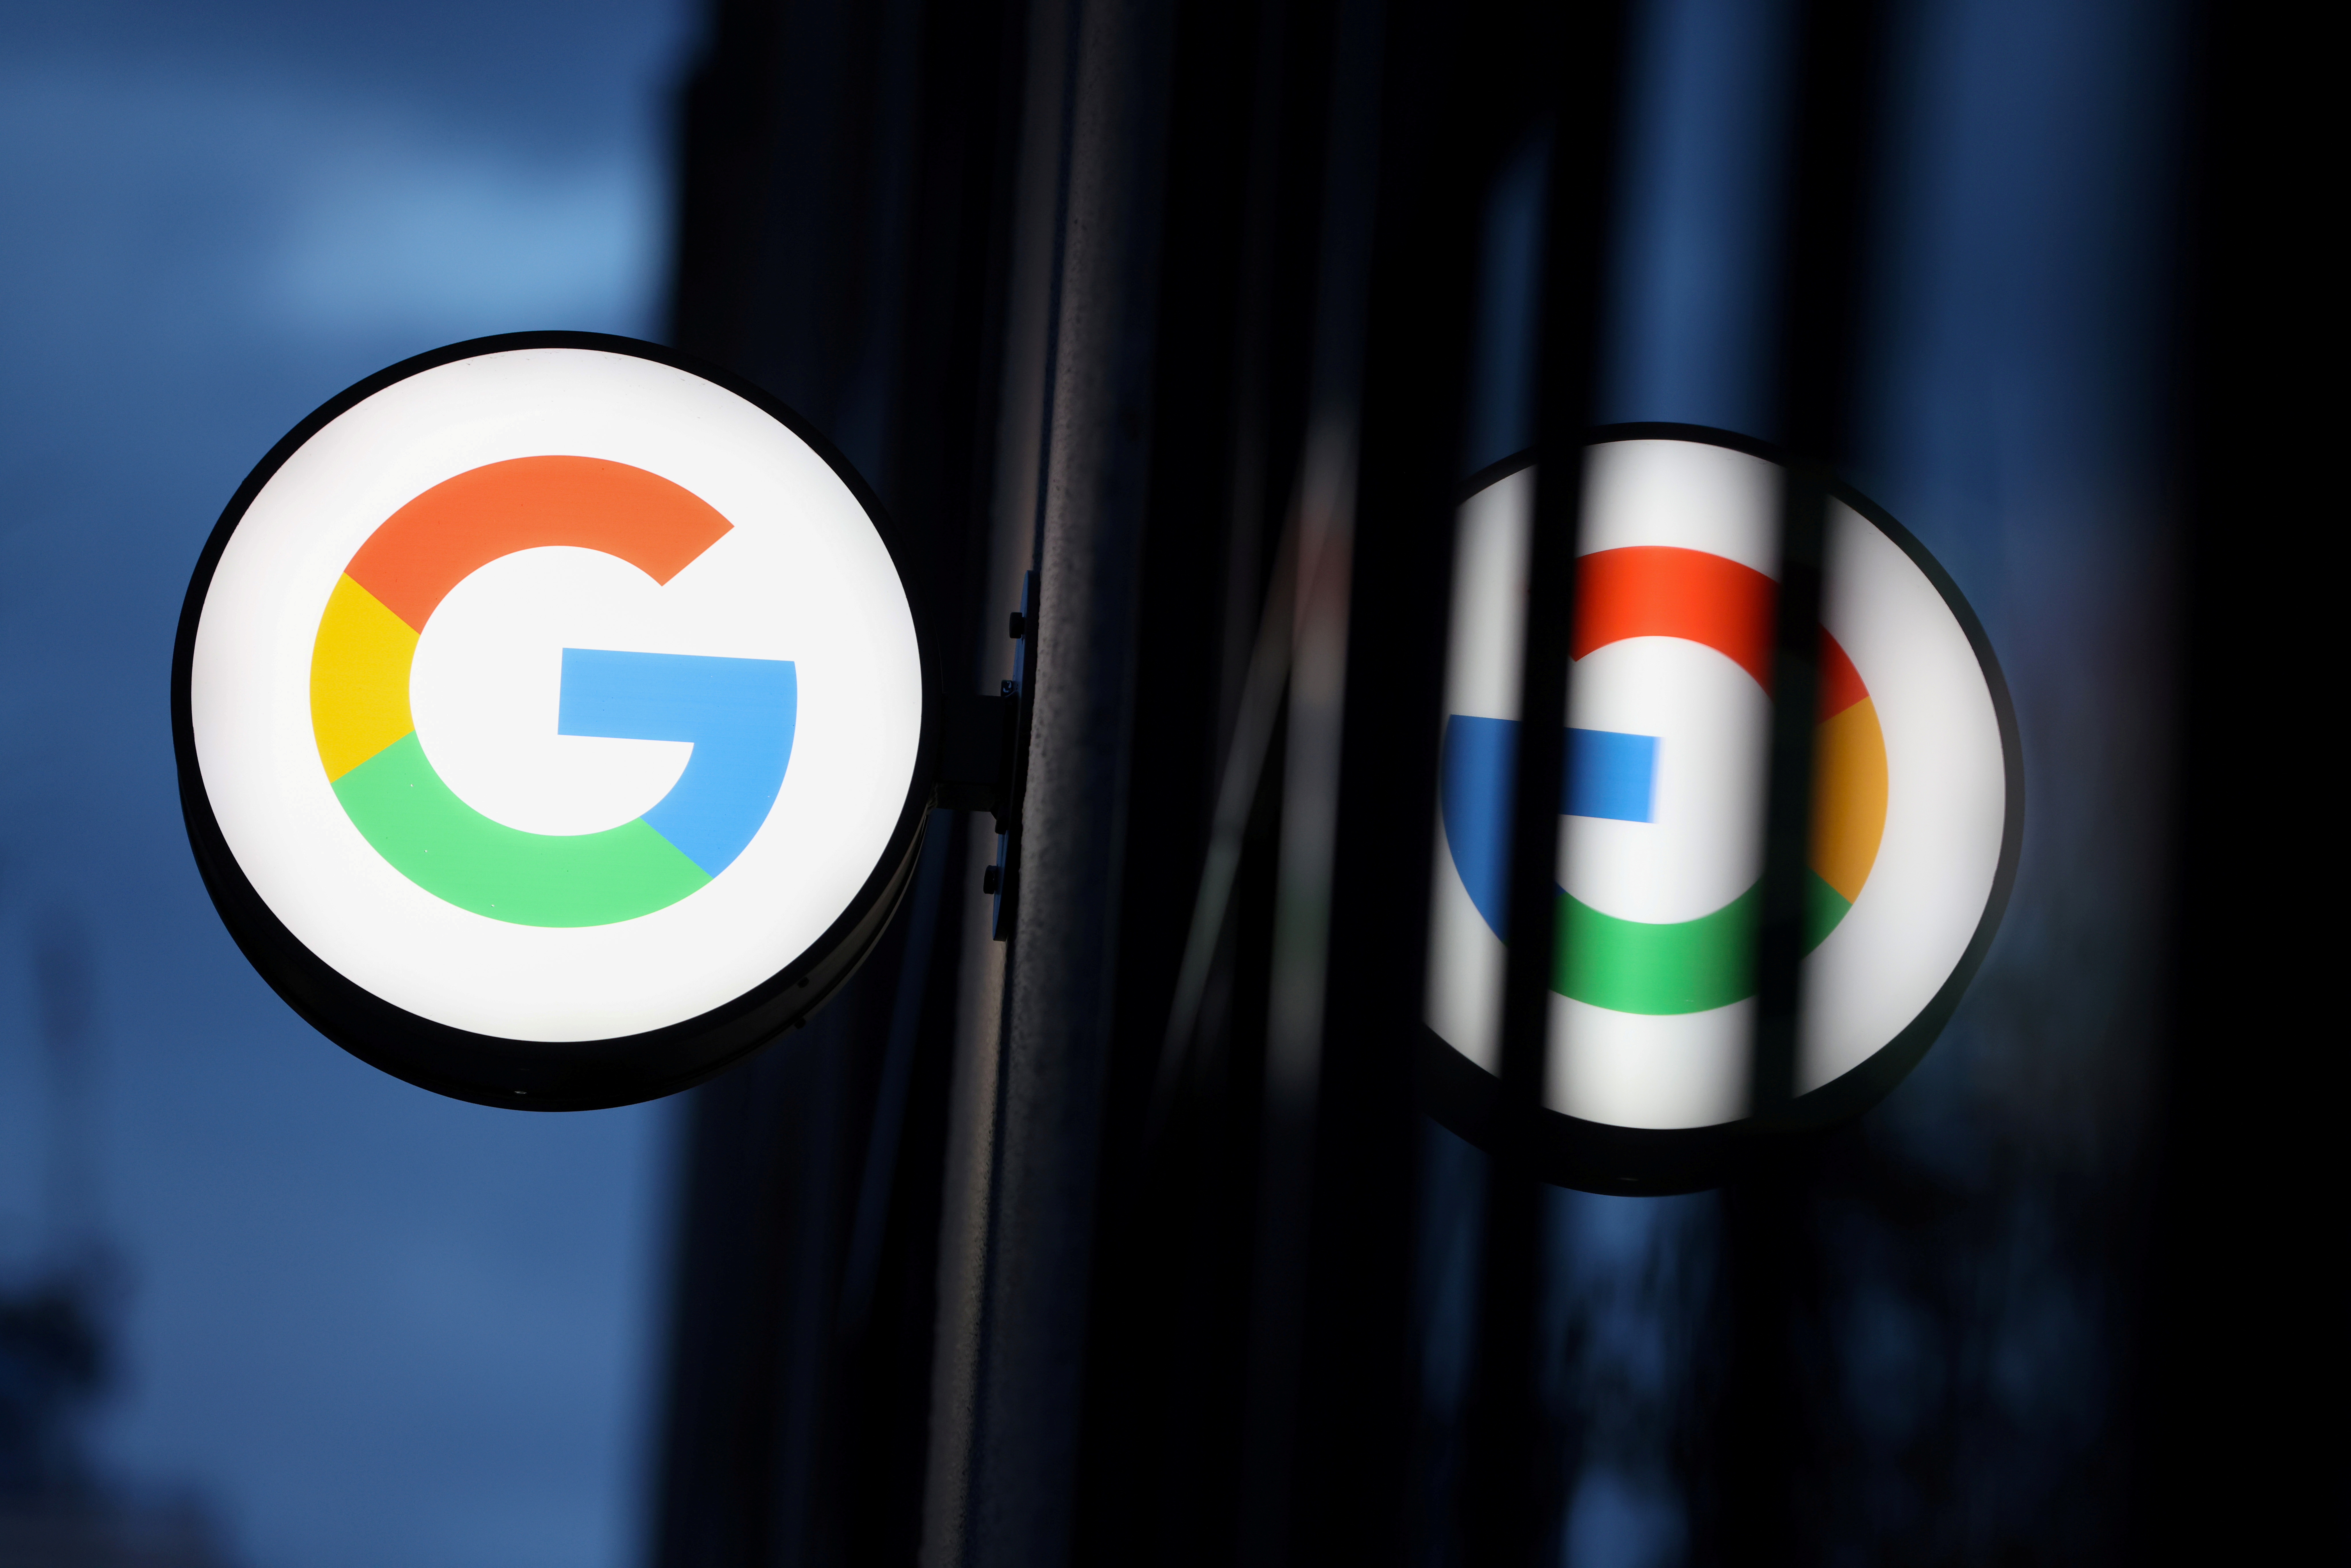 The logo for Google LLC is seen at the Google Store Chelsea in Manhattan, New York City, U.S. REUTERS/Andrew Kelly